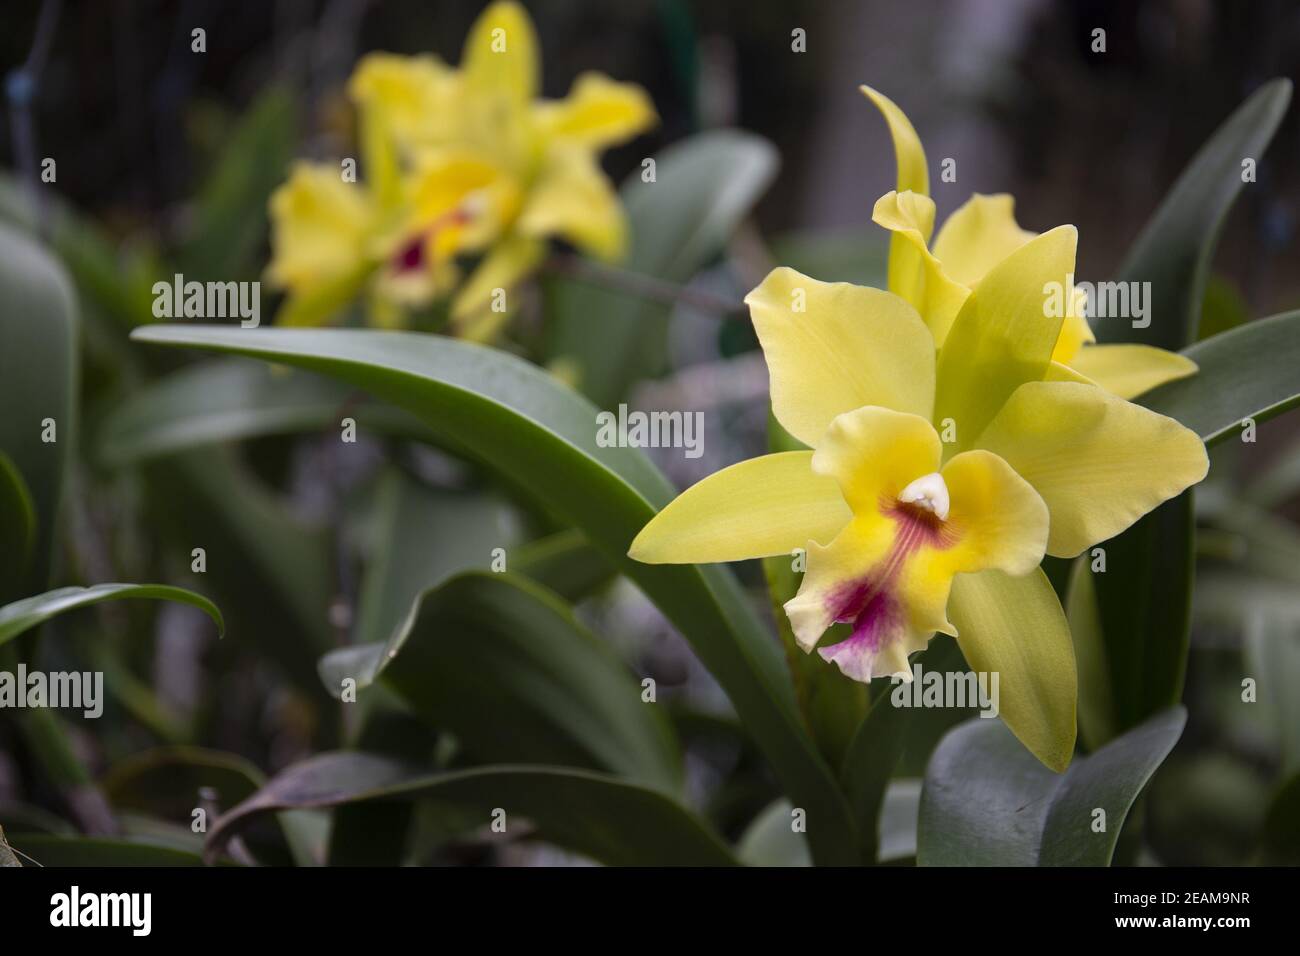 Closeup of yellow brassolaeliocattleya in a garden under the sunlight with a blurry background Stock Photo